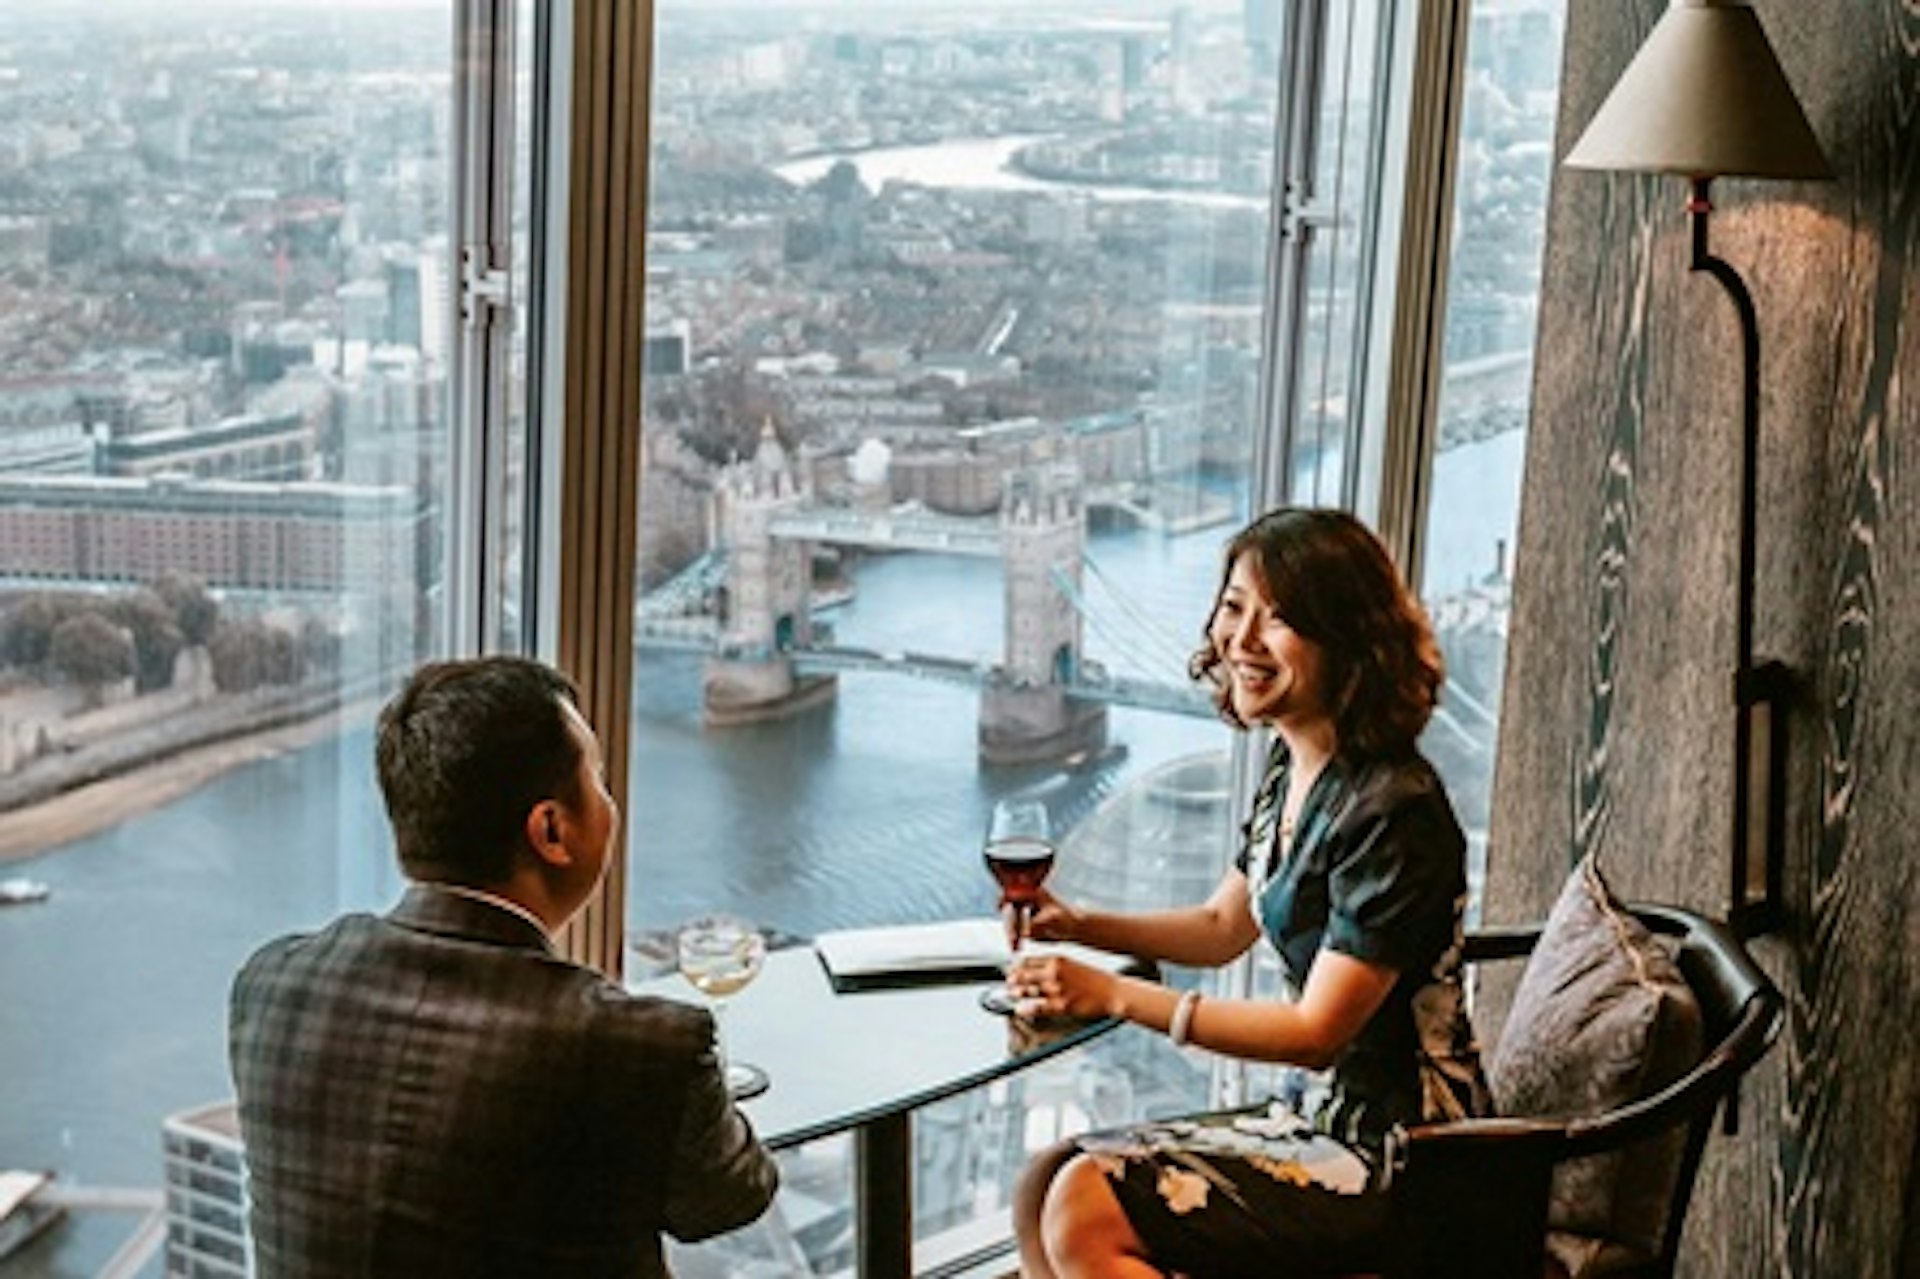 Liquid Afternoon Tea for Two at Gong within the 5* Luxury Shangri-La at The Shard, London 1